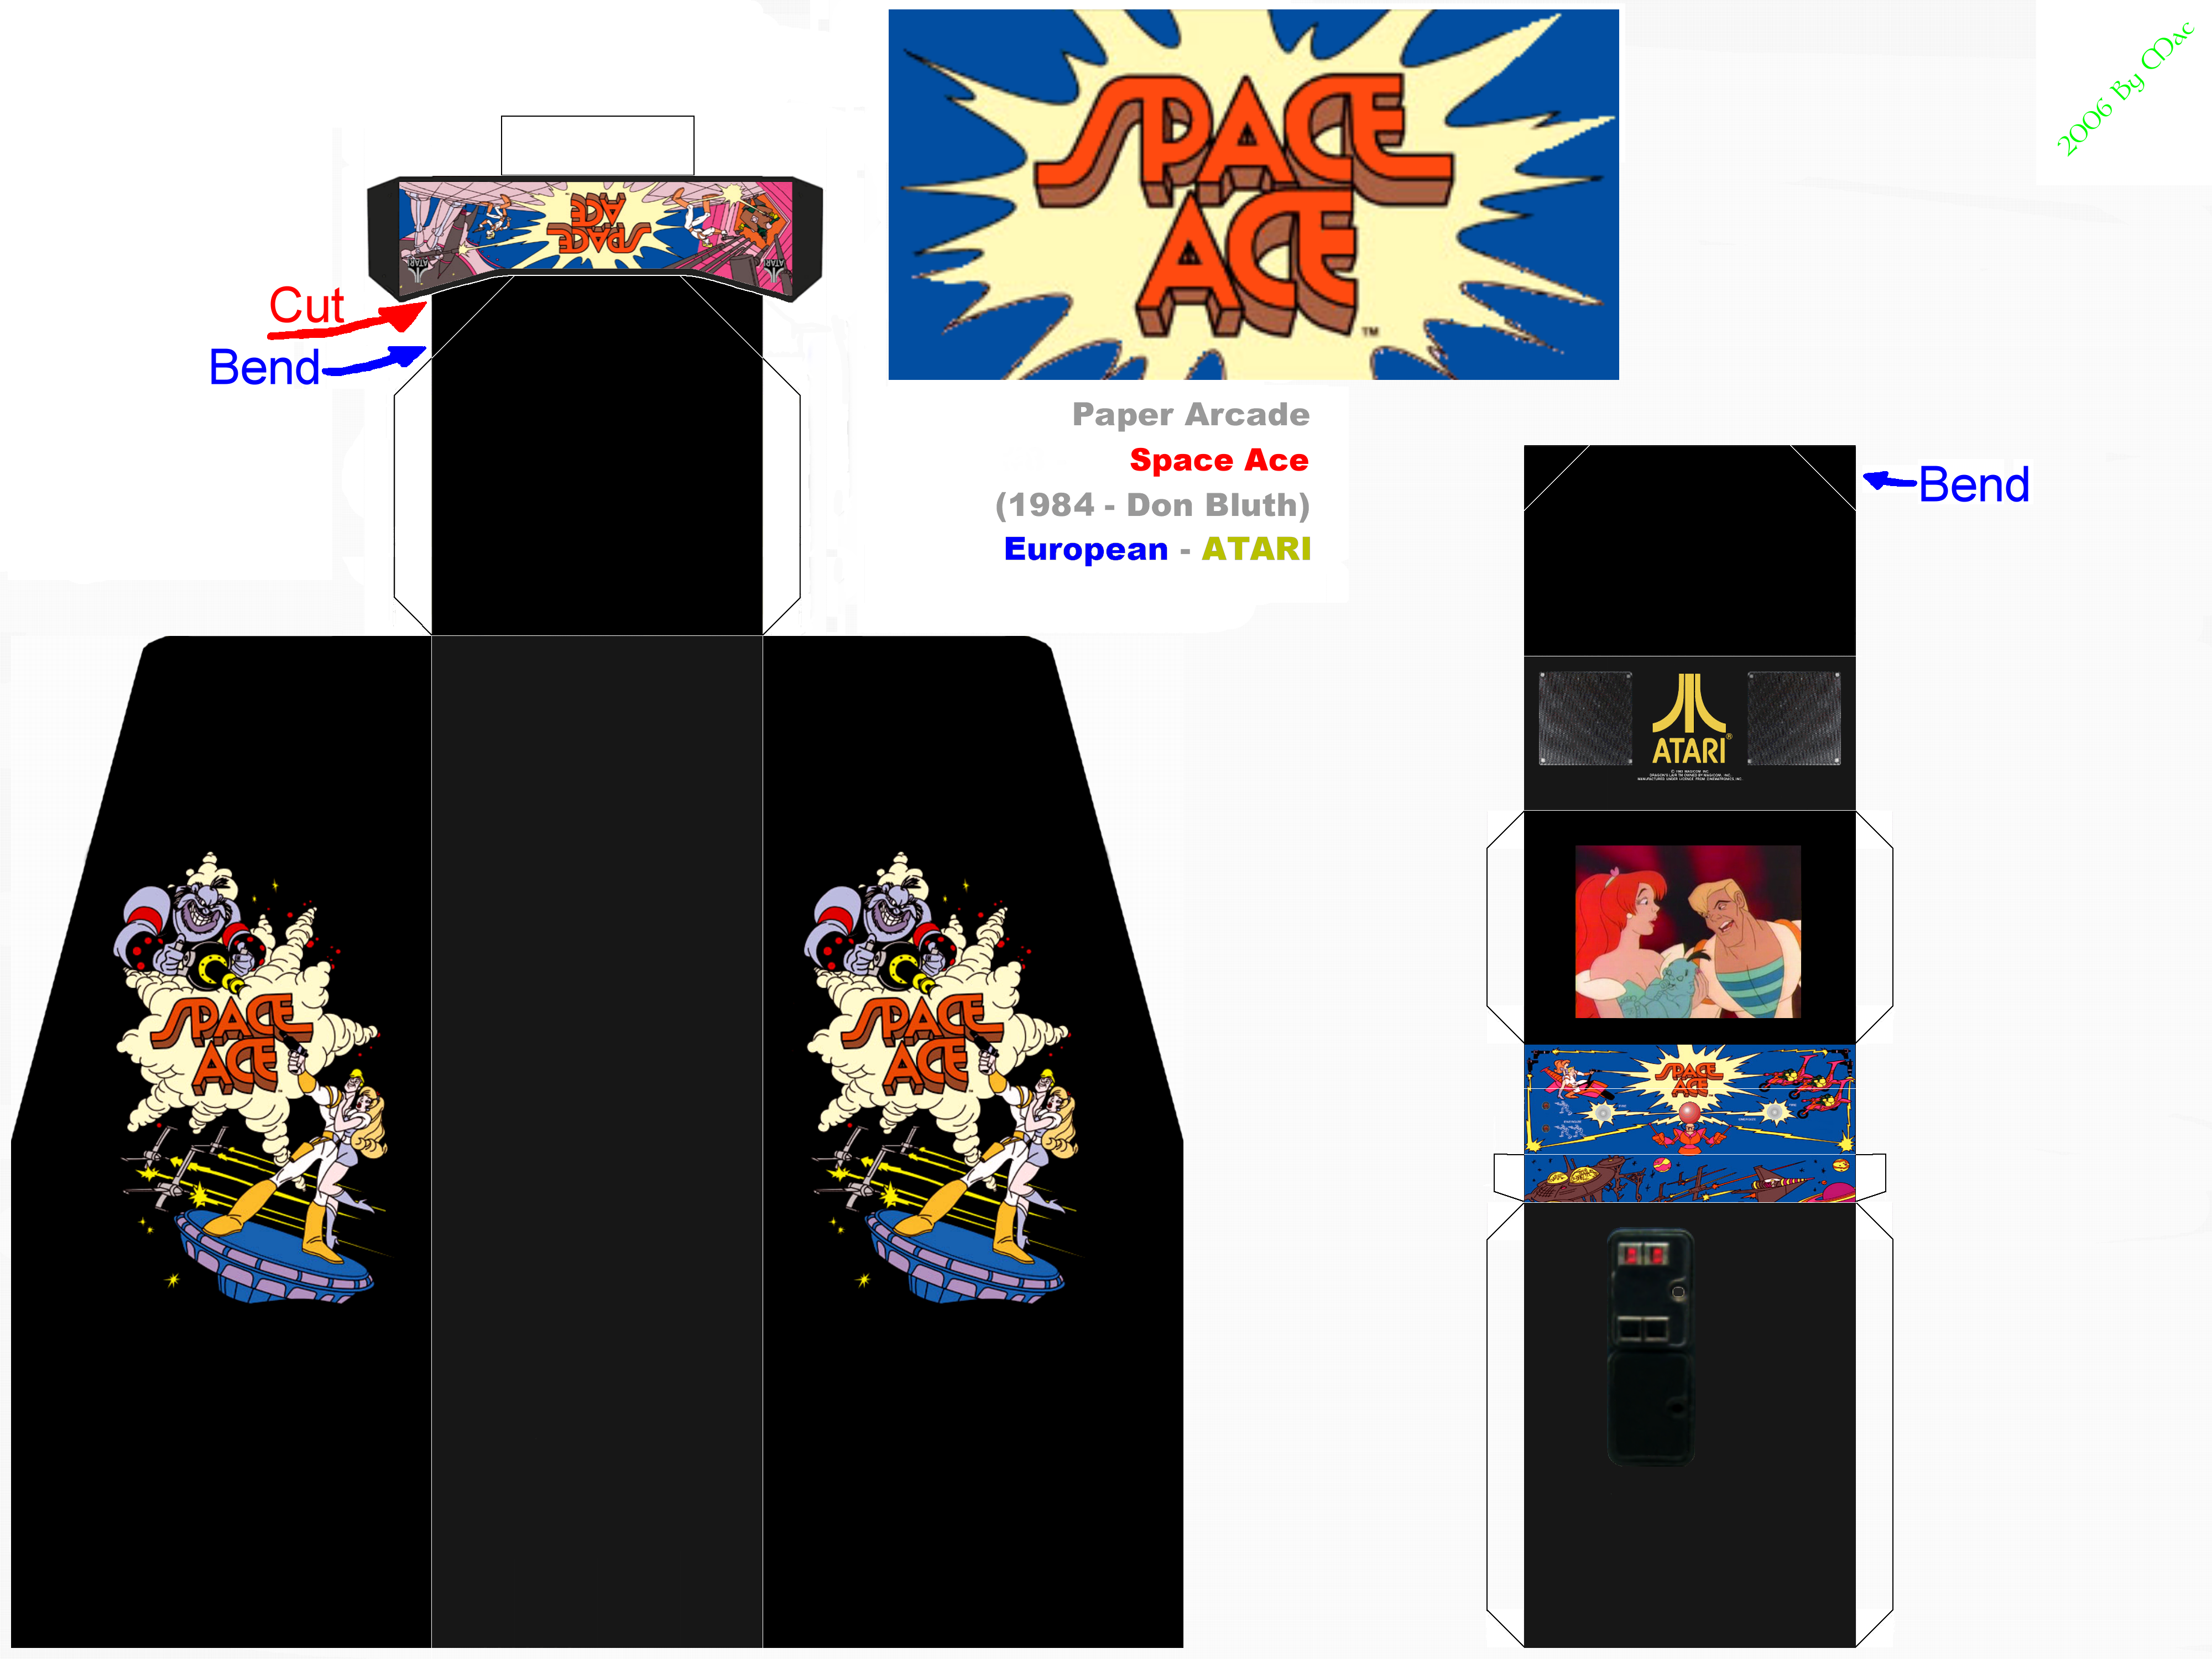 Internet: arcade papercraft found Crystal  more Two pacman Space and the on Ace. models Castles